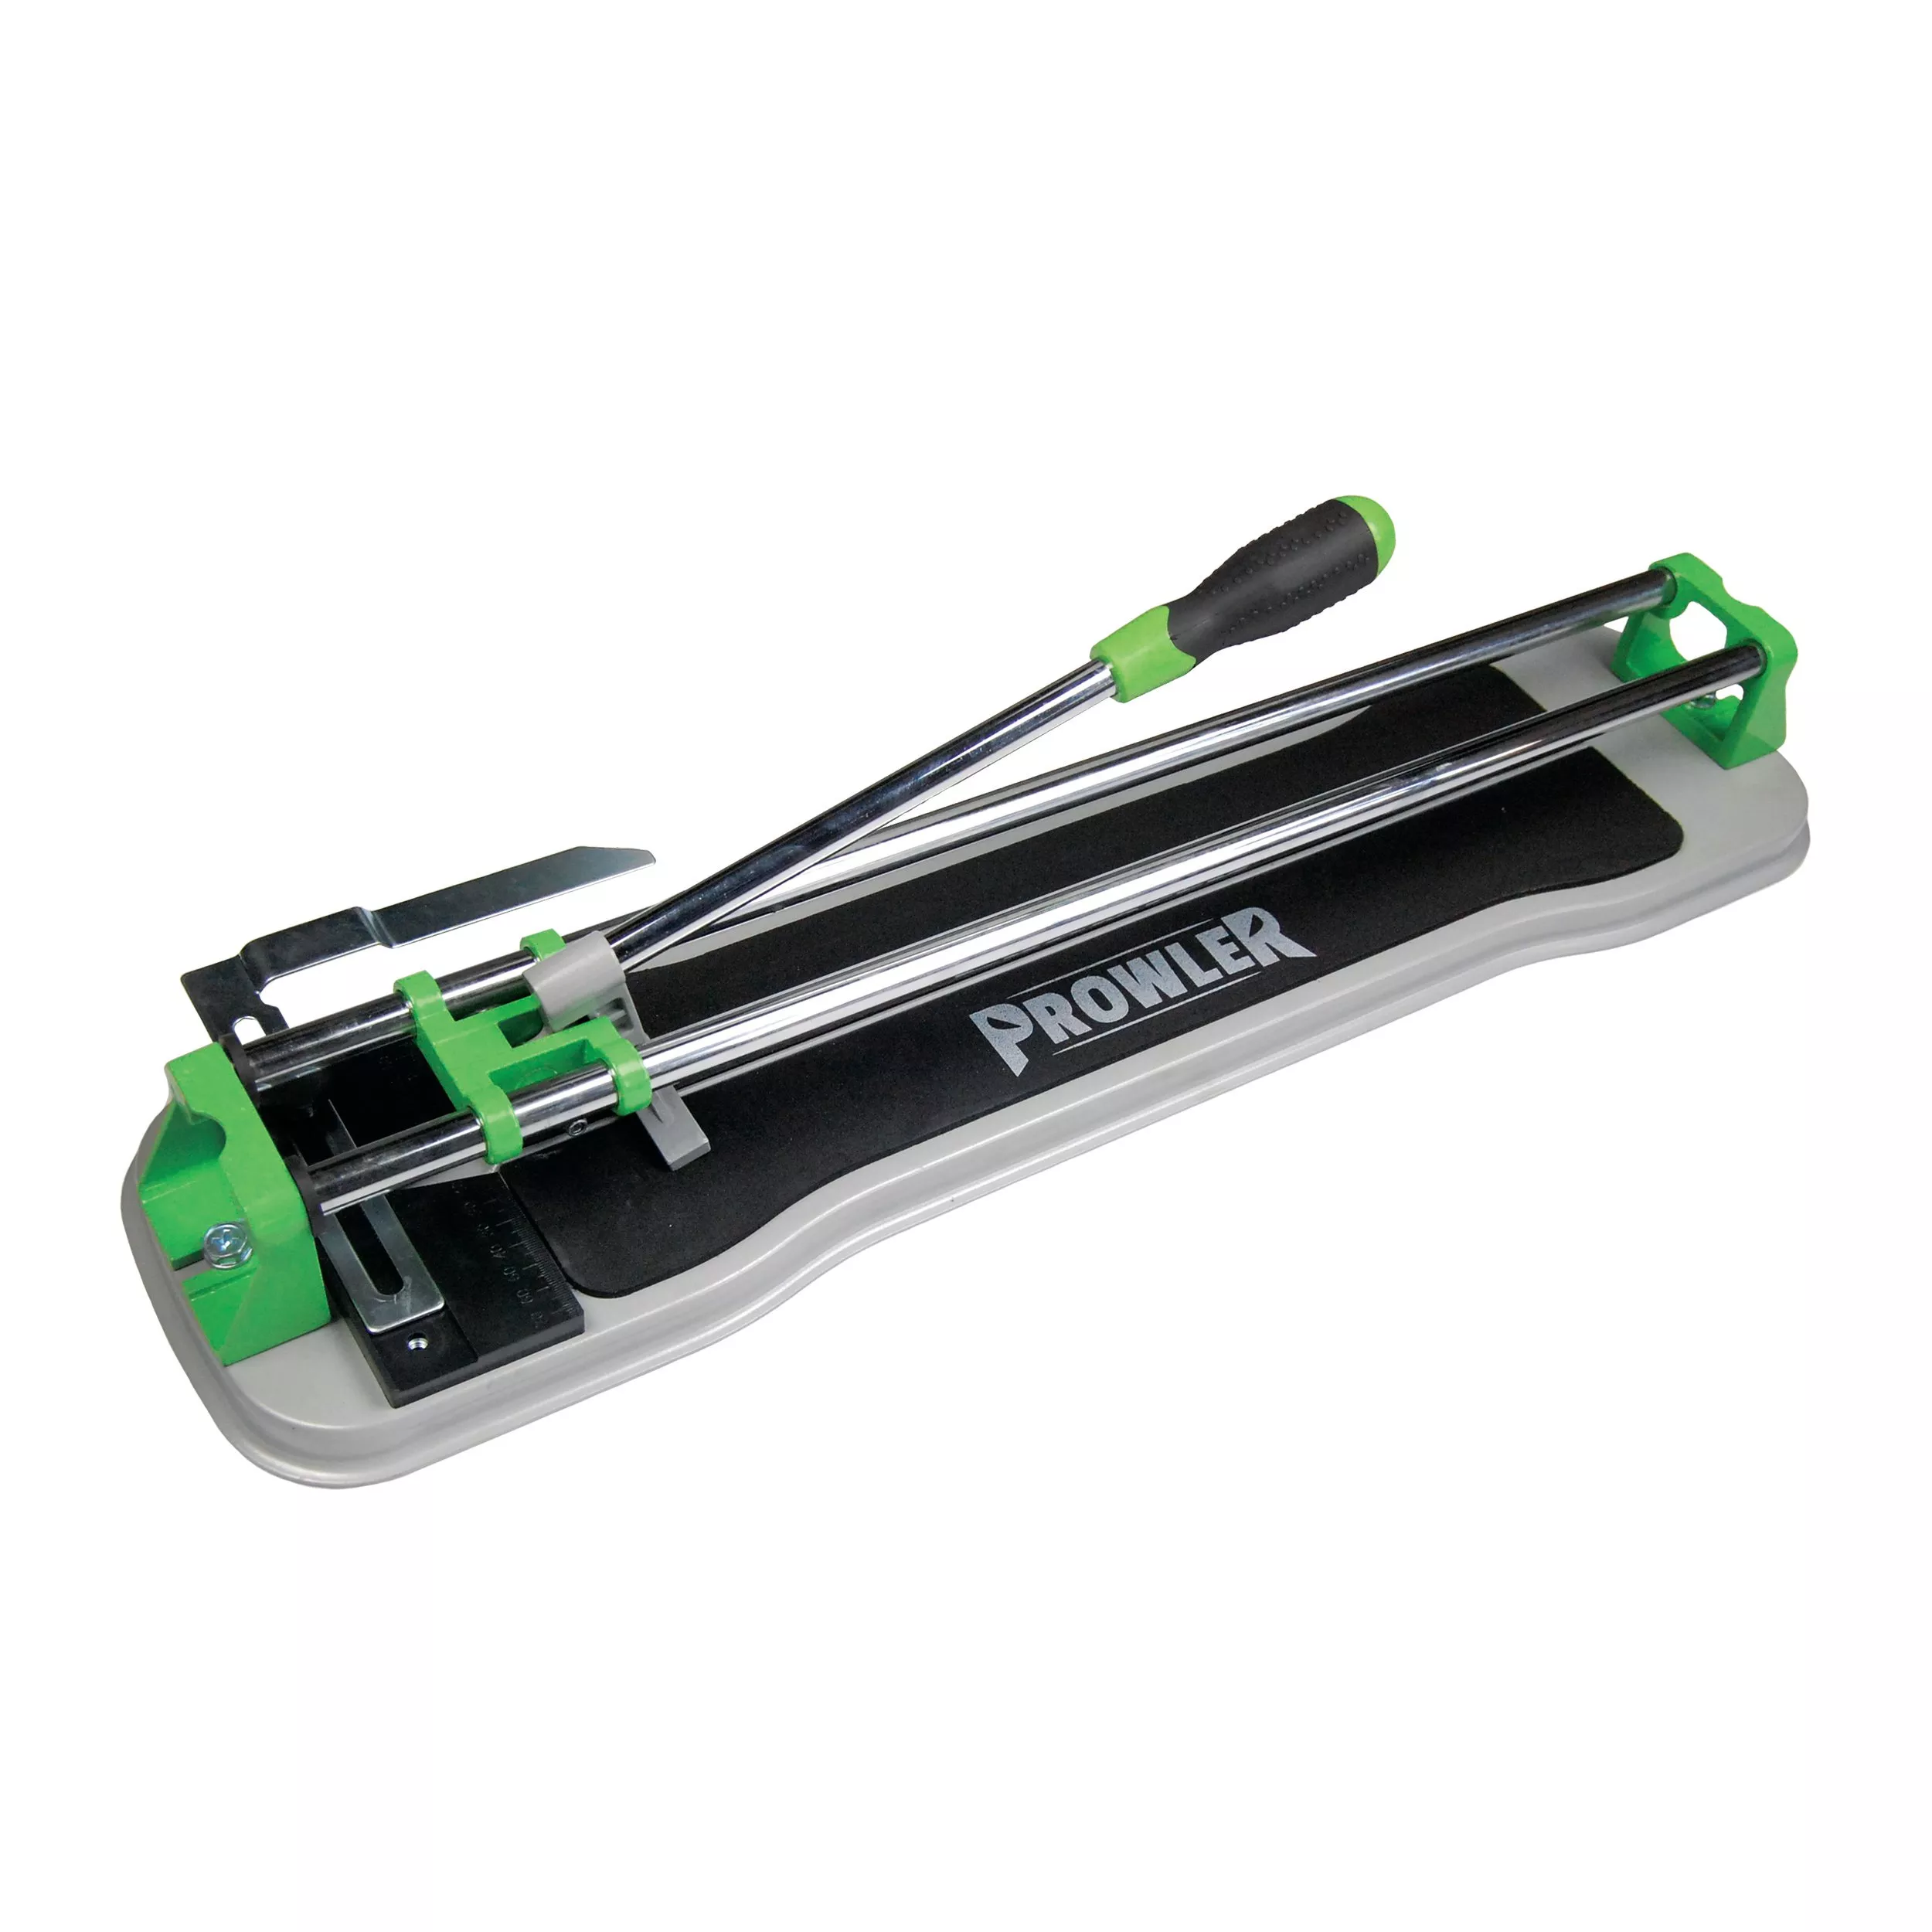 Prowler 14in. Manual Tile Cutter